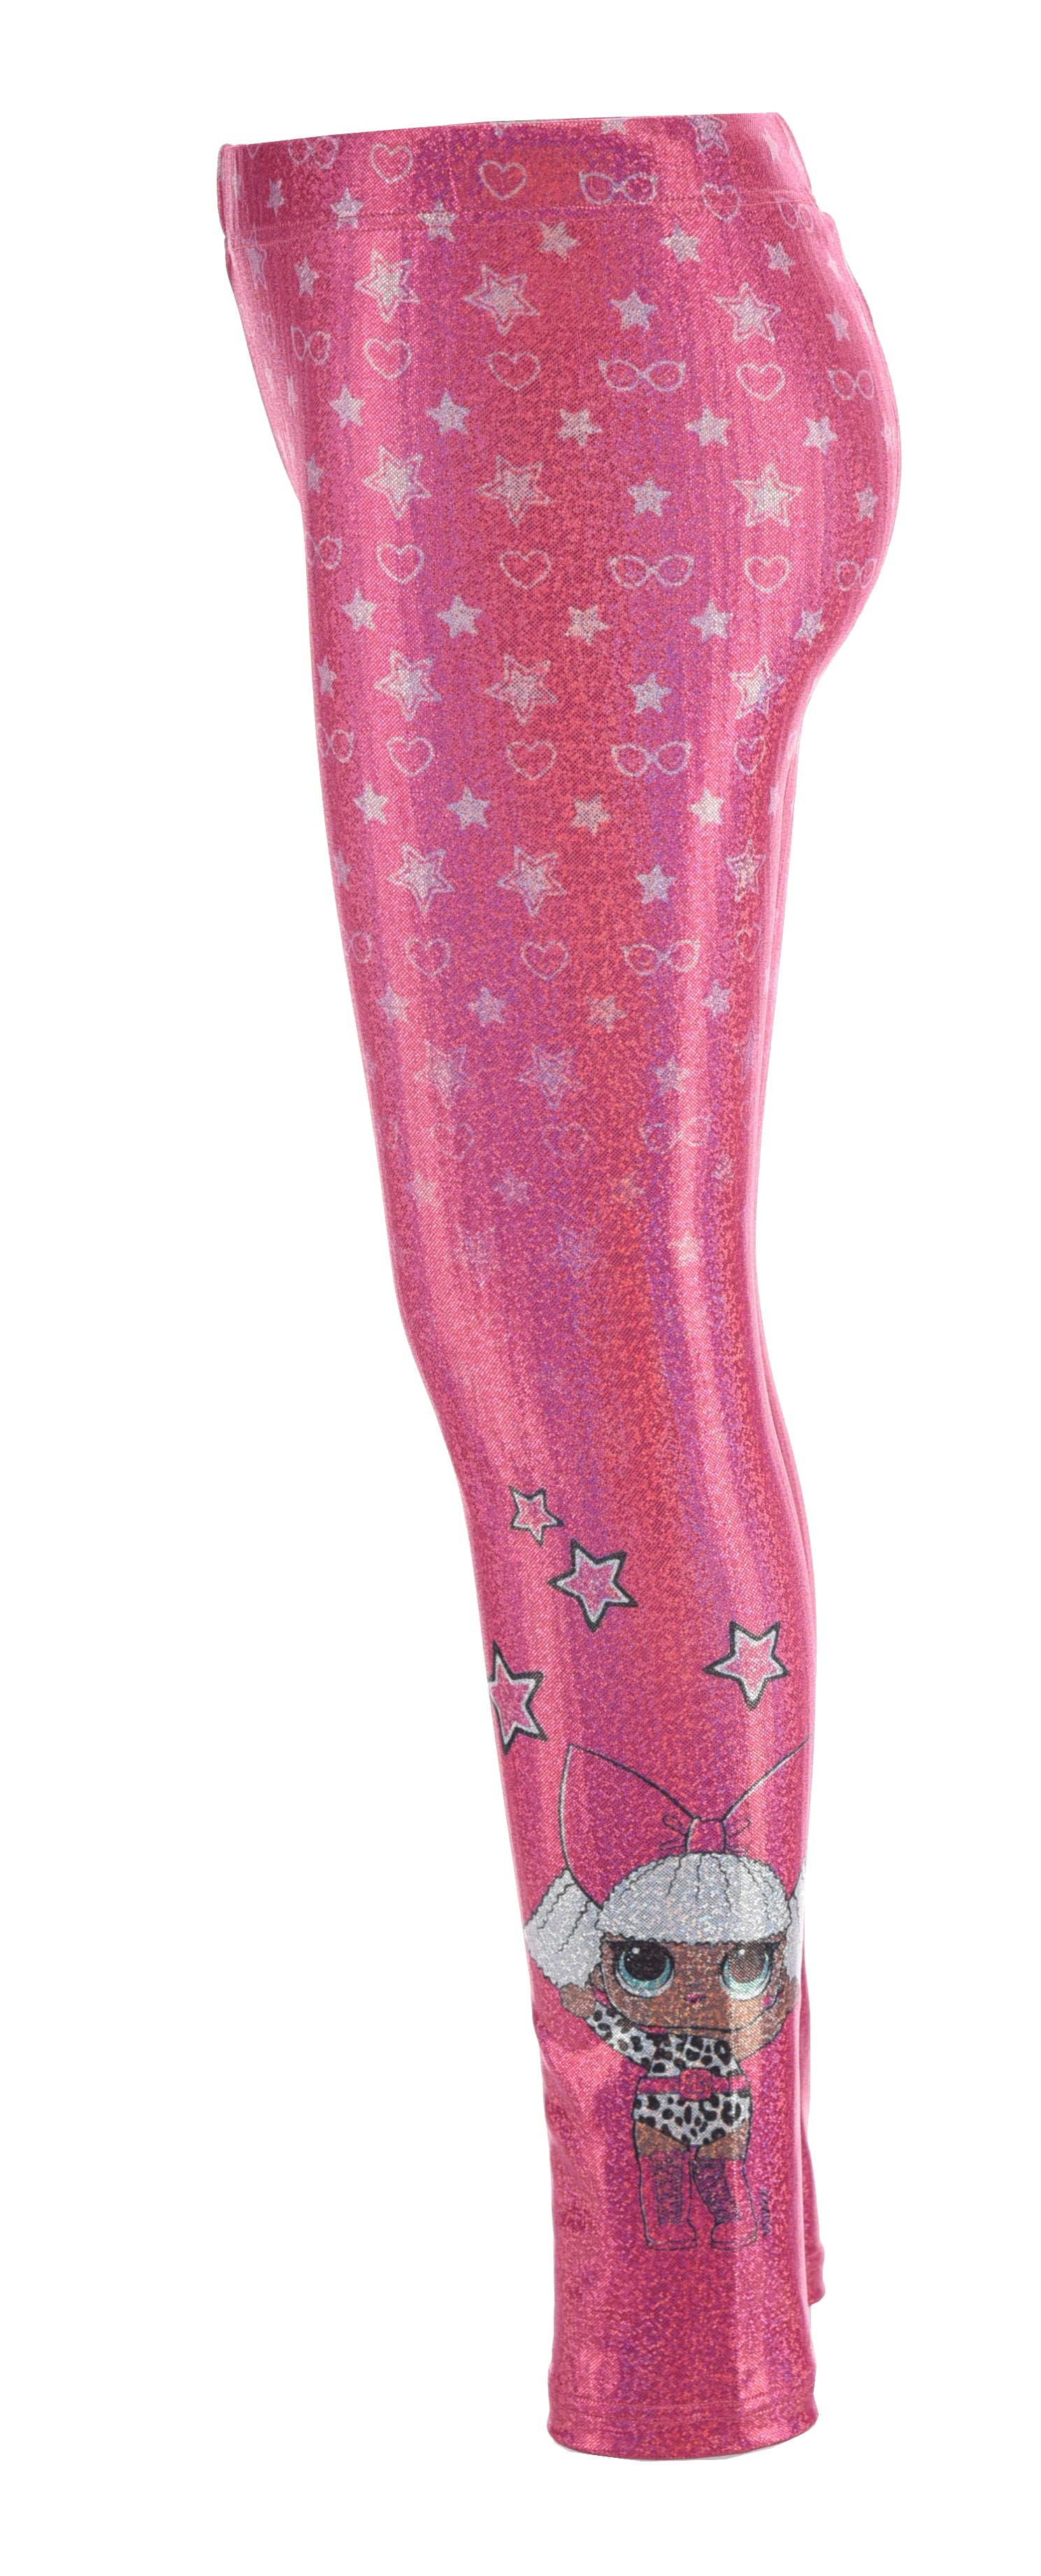 L.O.L Surprise Shiny Leggings, Fuchsia, Ages 5-6 (116cm), 7-8 (128cm), 9-10 (132cm), CM Sizes Are The Approximate Height Of The Child, 92% Polyester 8% Elastane, Official Merchandise